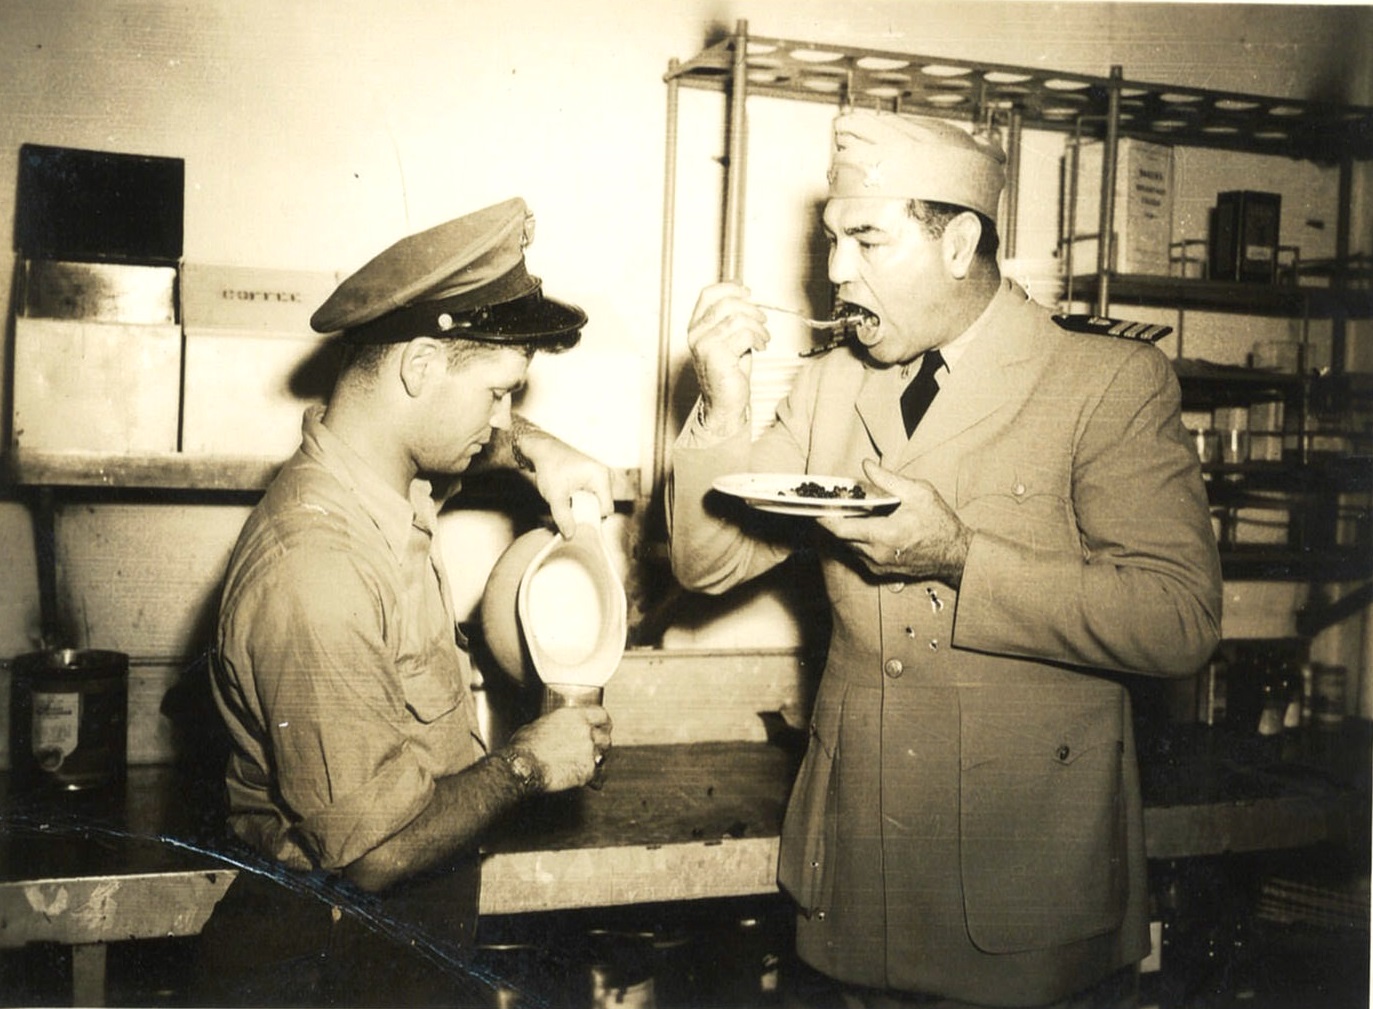 Chief Commissaryman Robert Manges serving former heavyweight boxing champ and Coast Guard commander, Jack Dempsey, pie and milk during Dempsey’s crossing to the European theater. (Courtesy of Robert Manges)